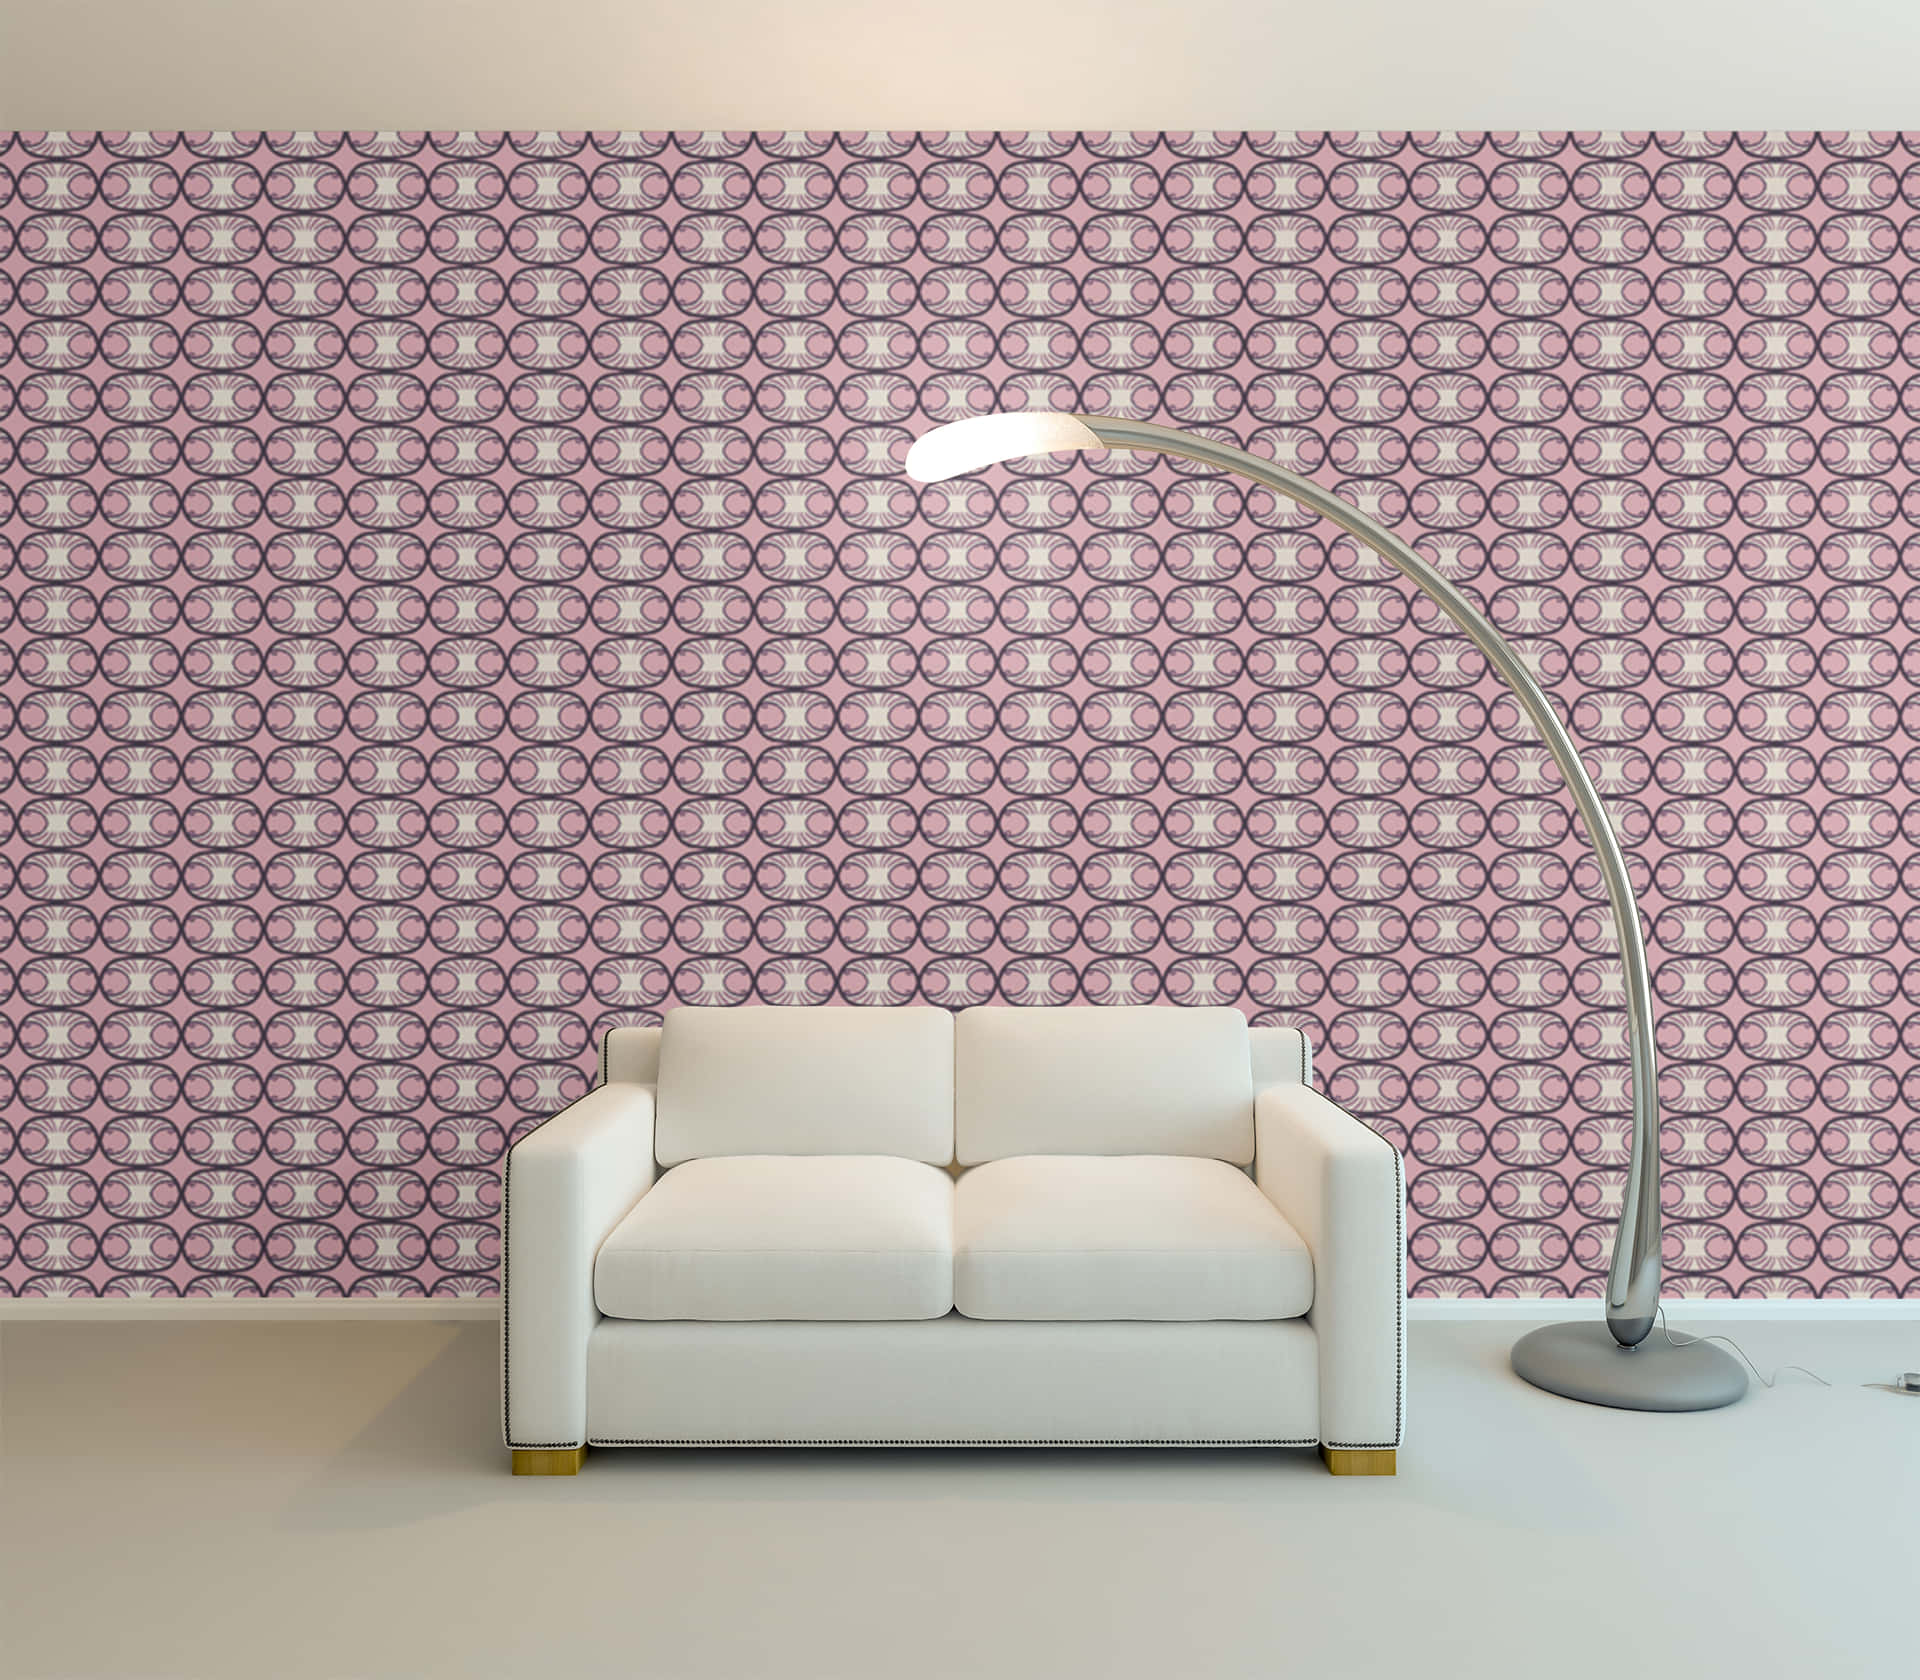 Pink and Black Intersect with White Harmony Wallpaper